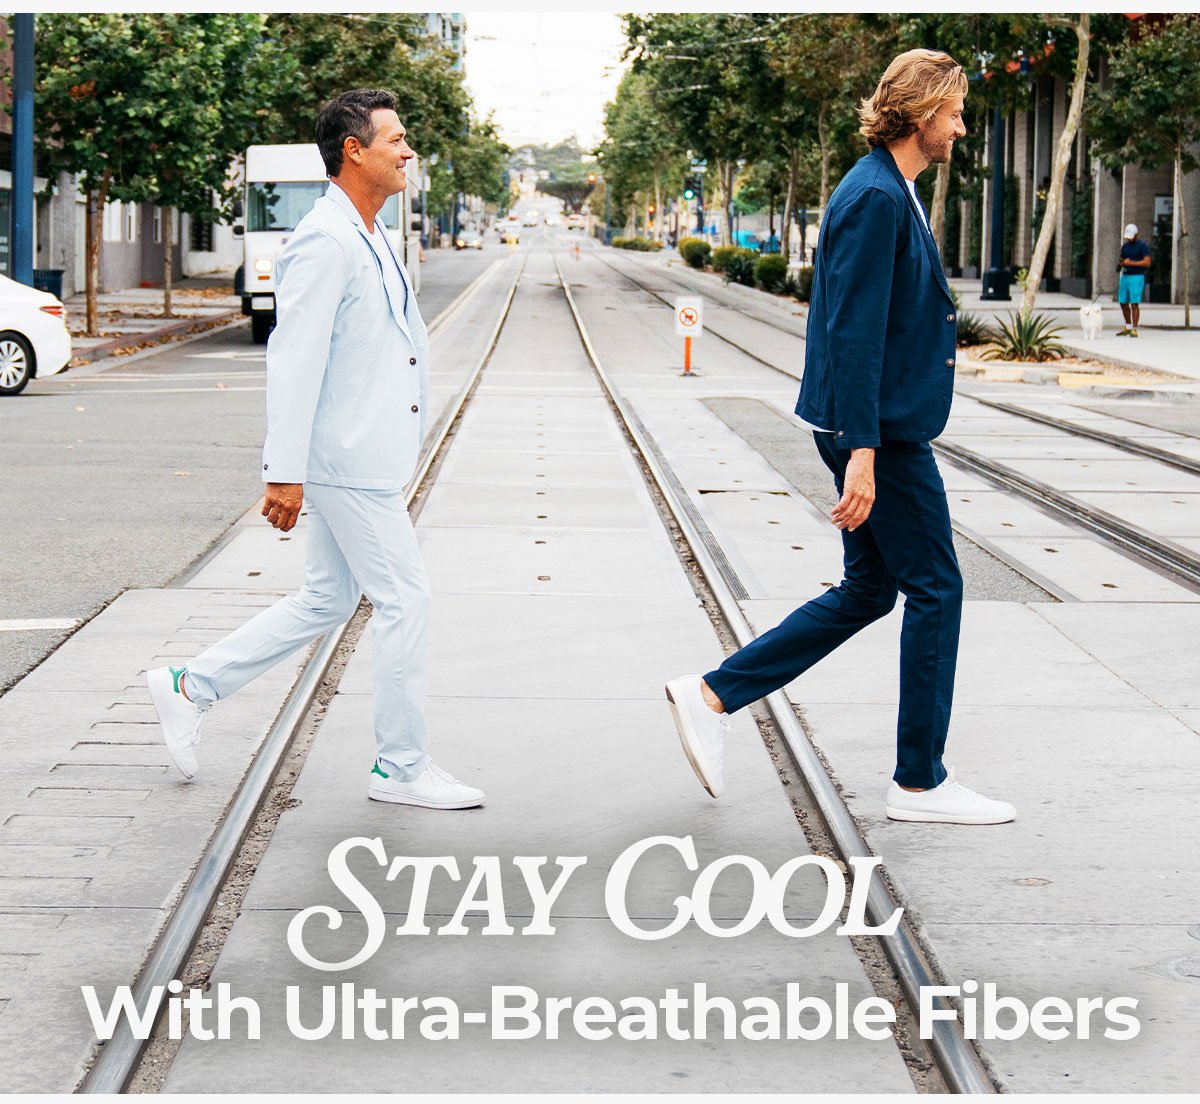 Stay cool with ultra-breathable fibers. Image is two models in the skylines suit and the morgans suit crossing the street.